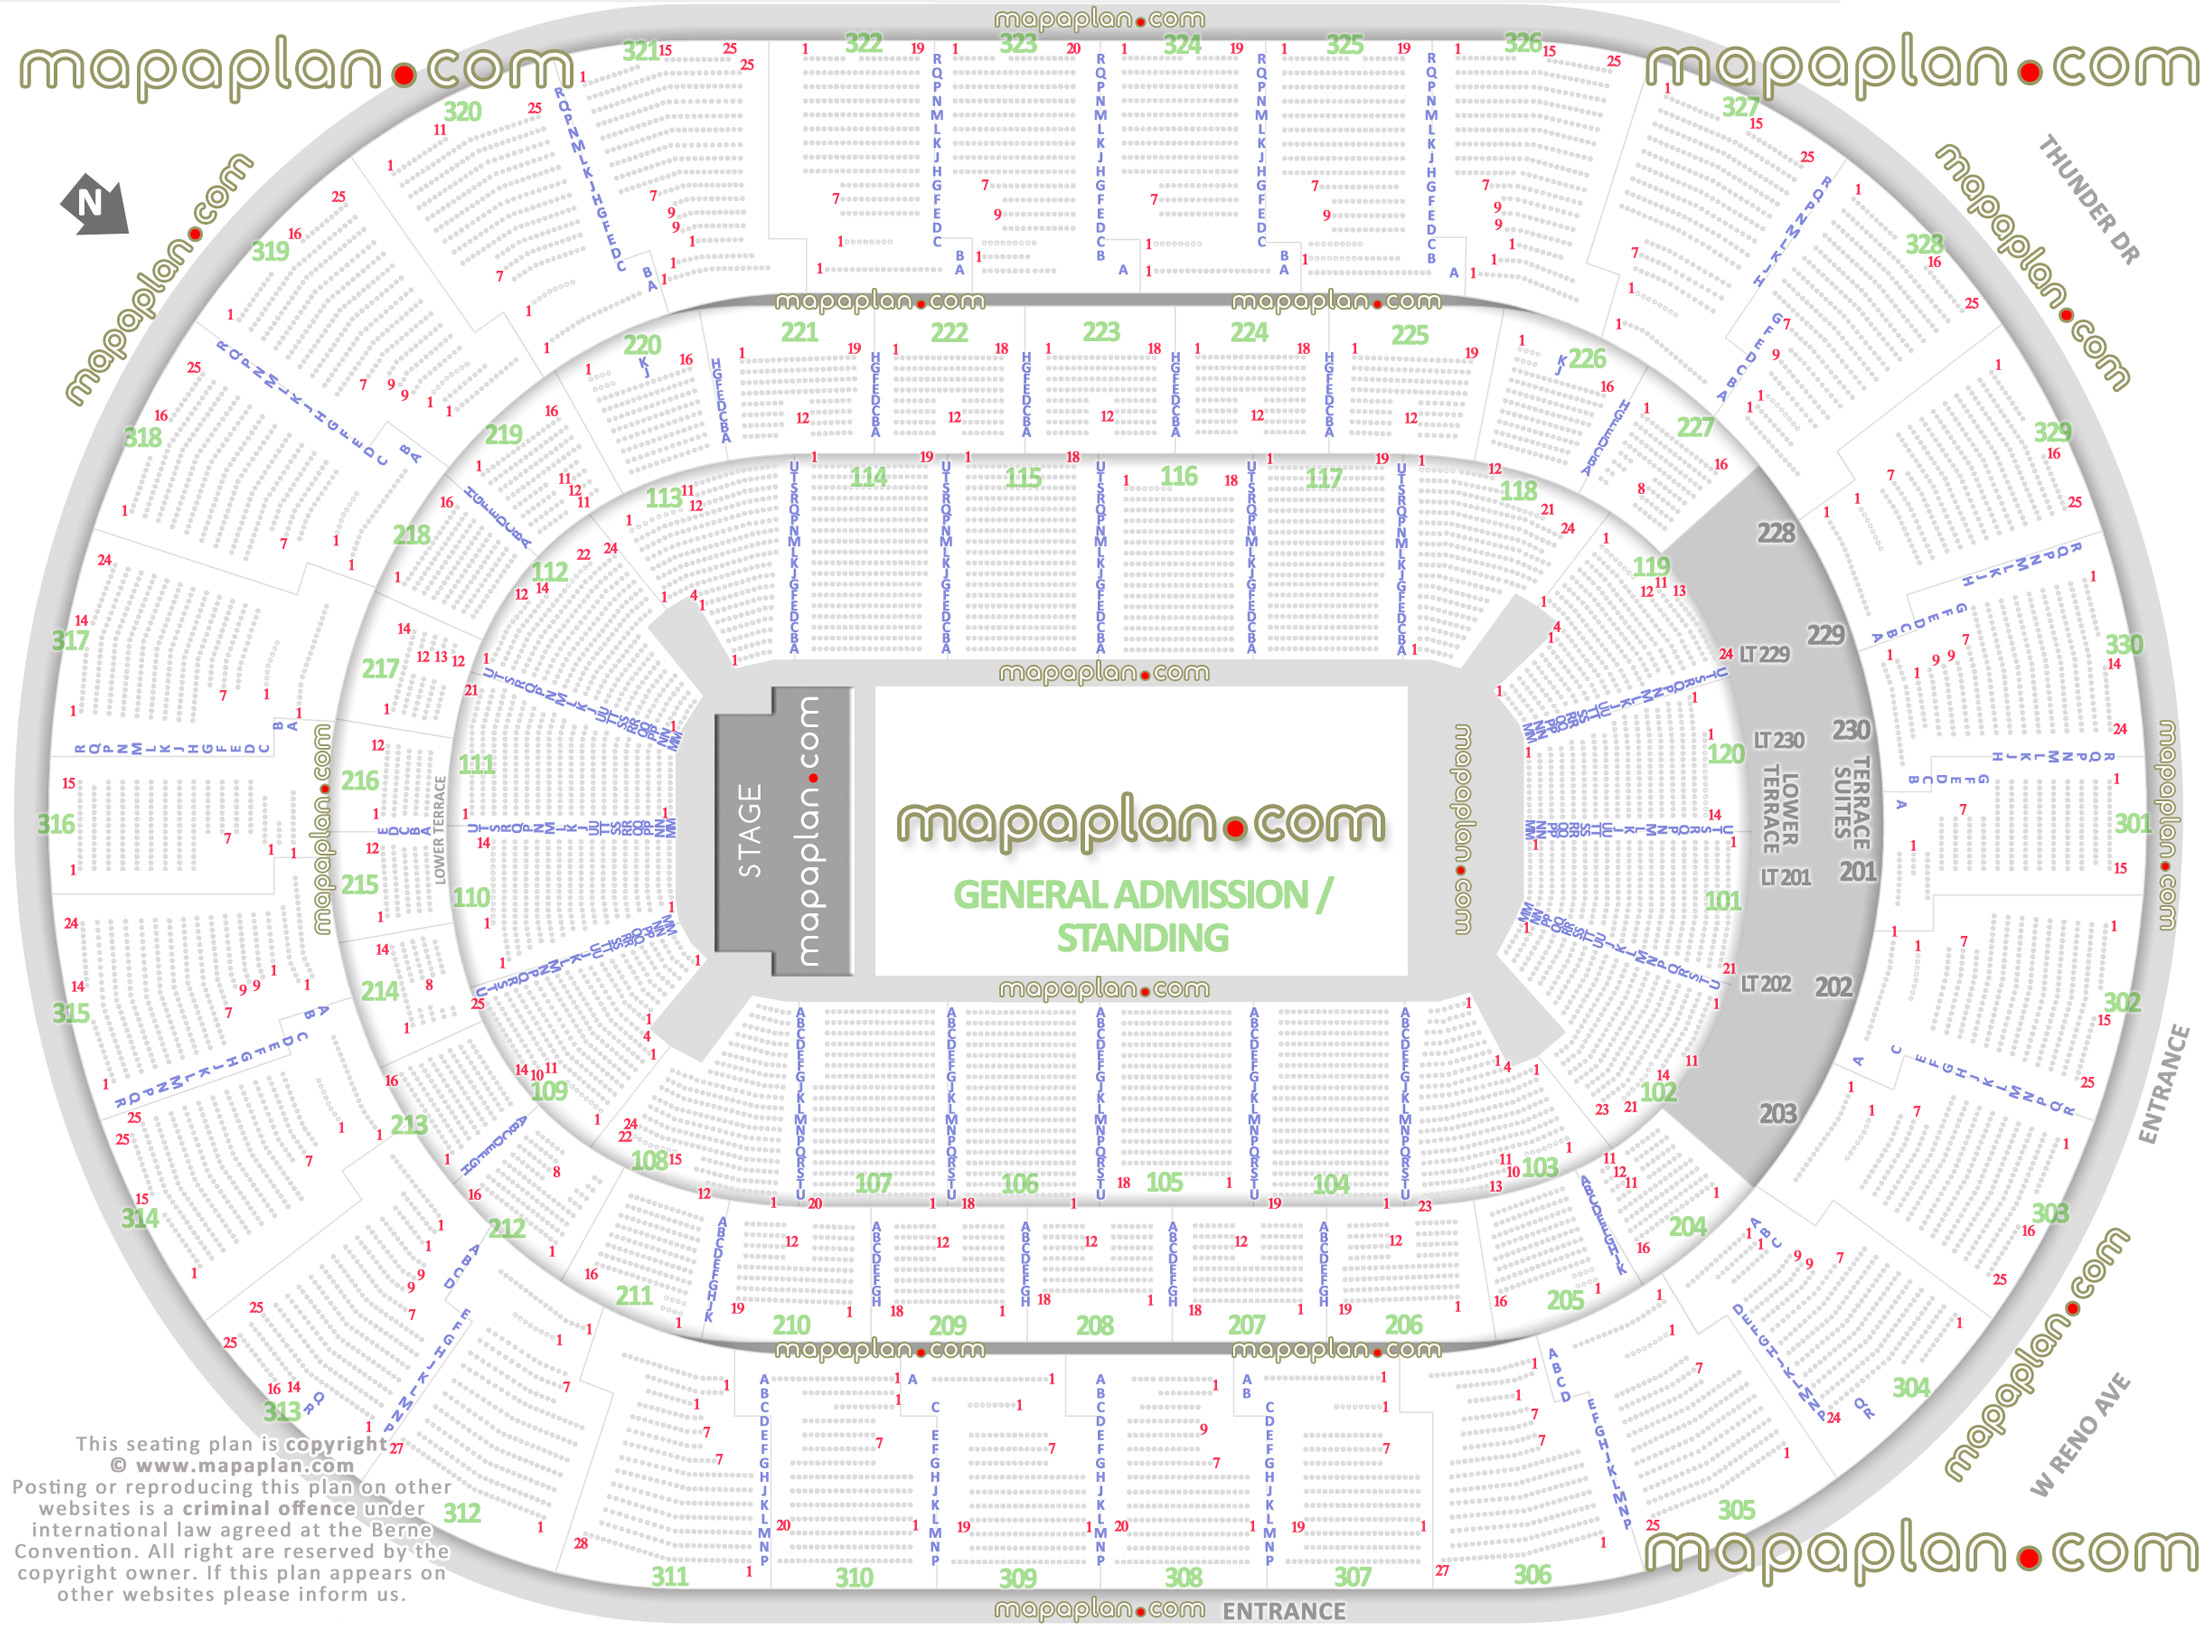 general admission ga floor standing concert capacity 3d plan chesapeake energy arena center ok concert stage detailed floor pit plan sections best seat numbers selection information guide virtual interactive image map rows a b c d e f g h j k l m n p q r s t u Oklahoma City Chesapeake Energy Arena seating chart